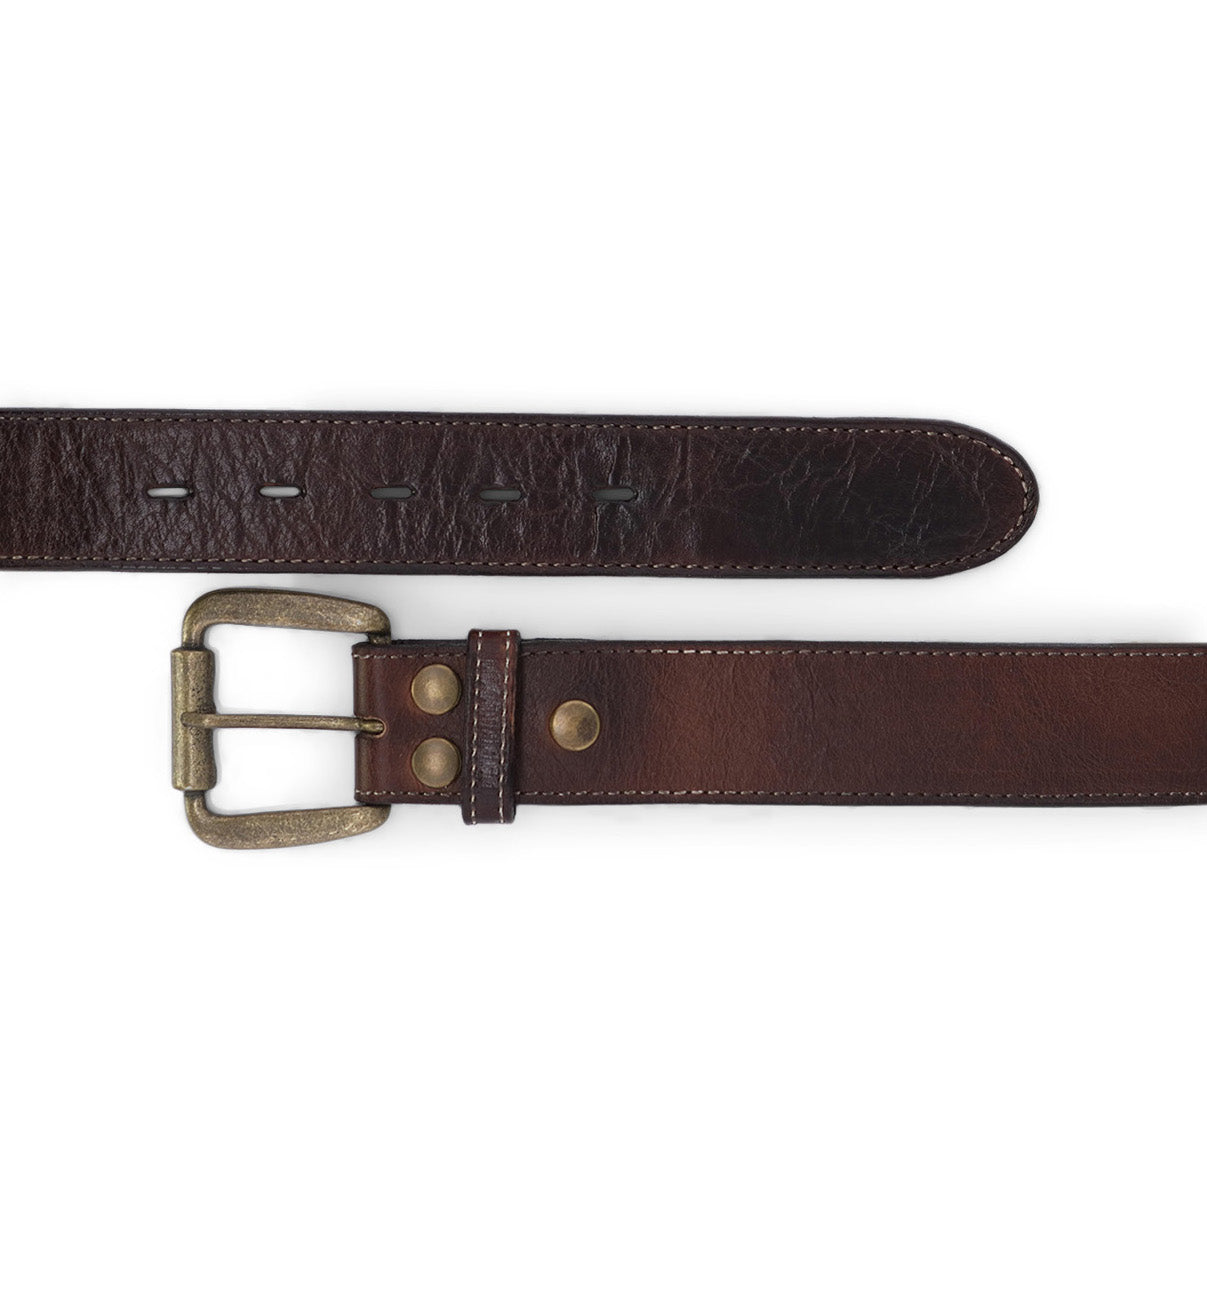 Two Meander Black Lux Belts by Bed Stu, one dark and one light distressed leather belt, arranged parallel on a white background.